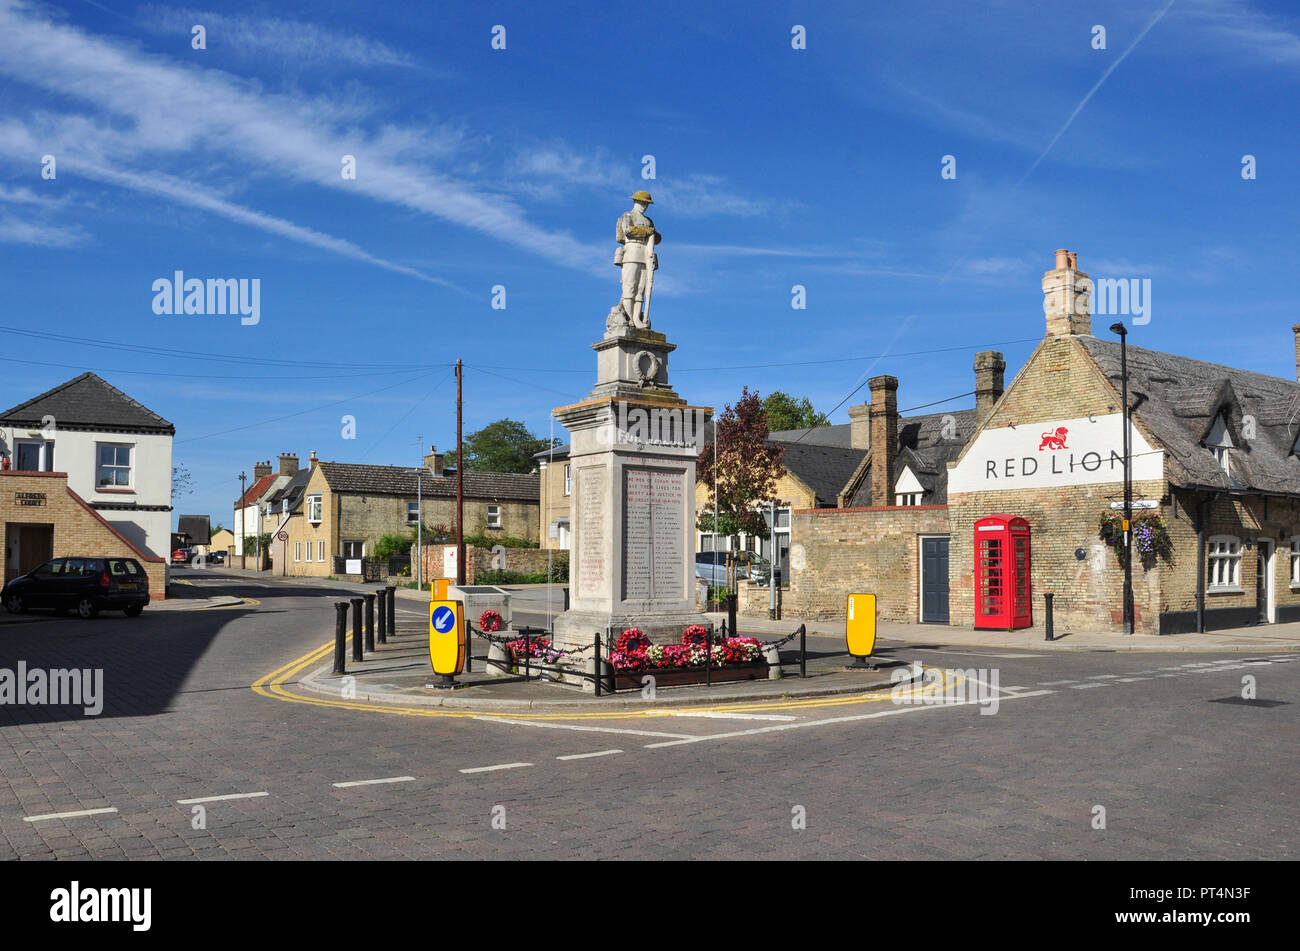 War Memorial, Red Lion Square, (junction of High Street and Clay Street), Soham, Cambridgeshire, England, UK Stock Photo